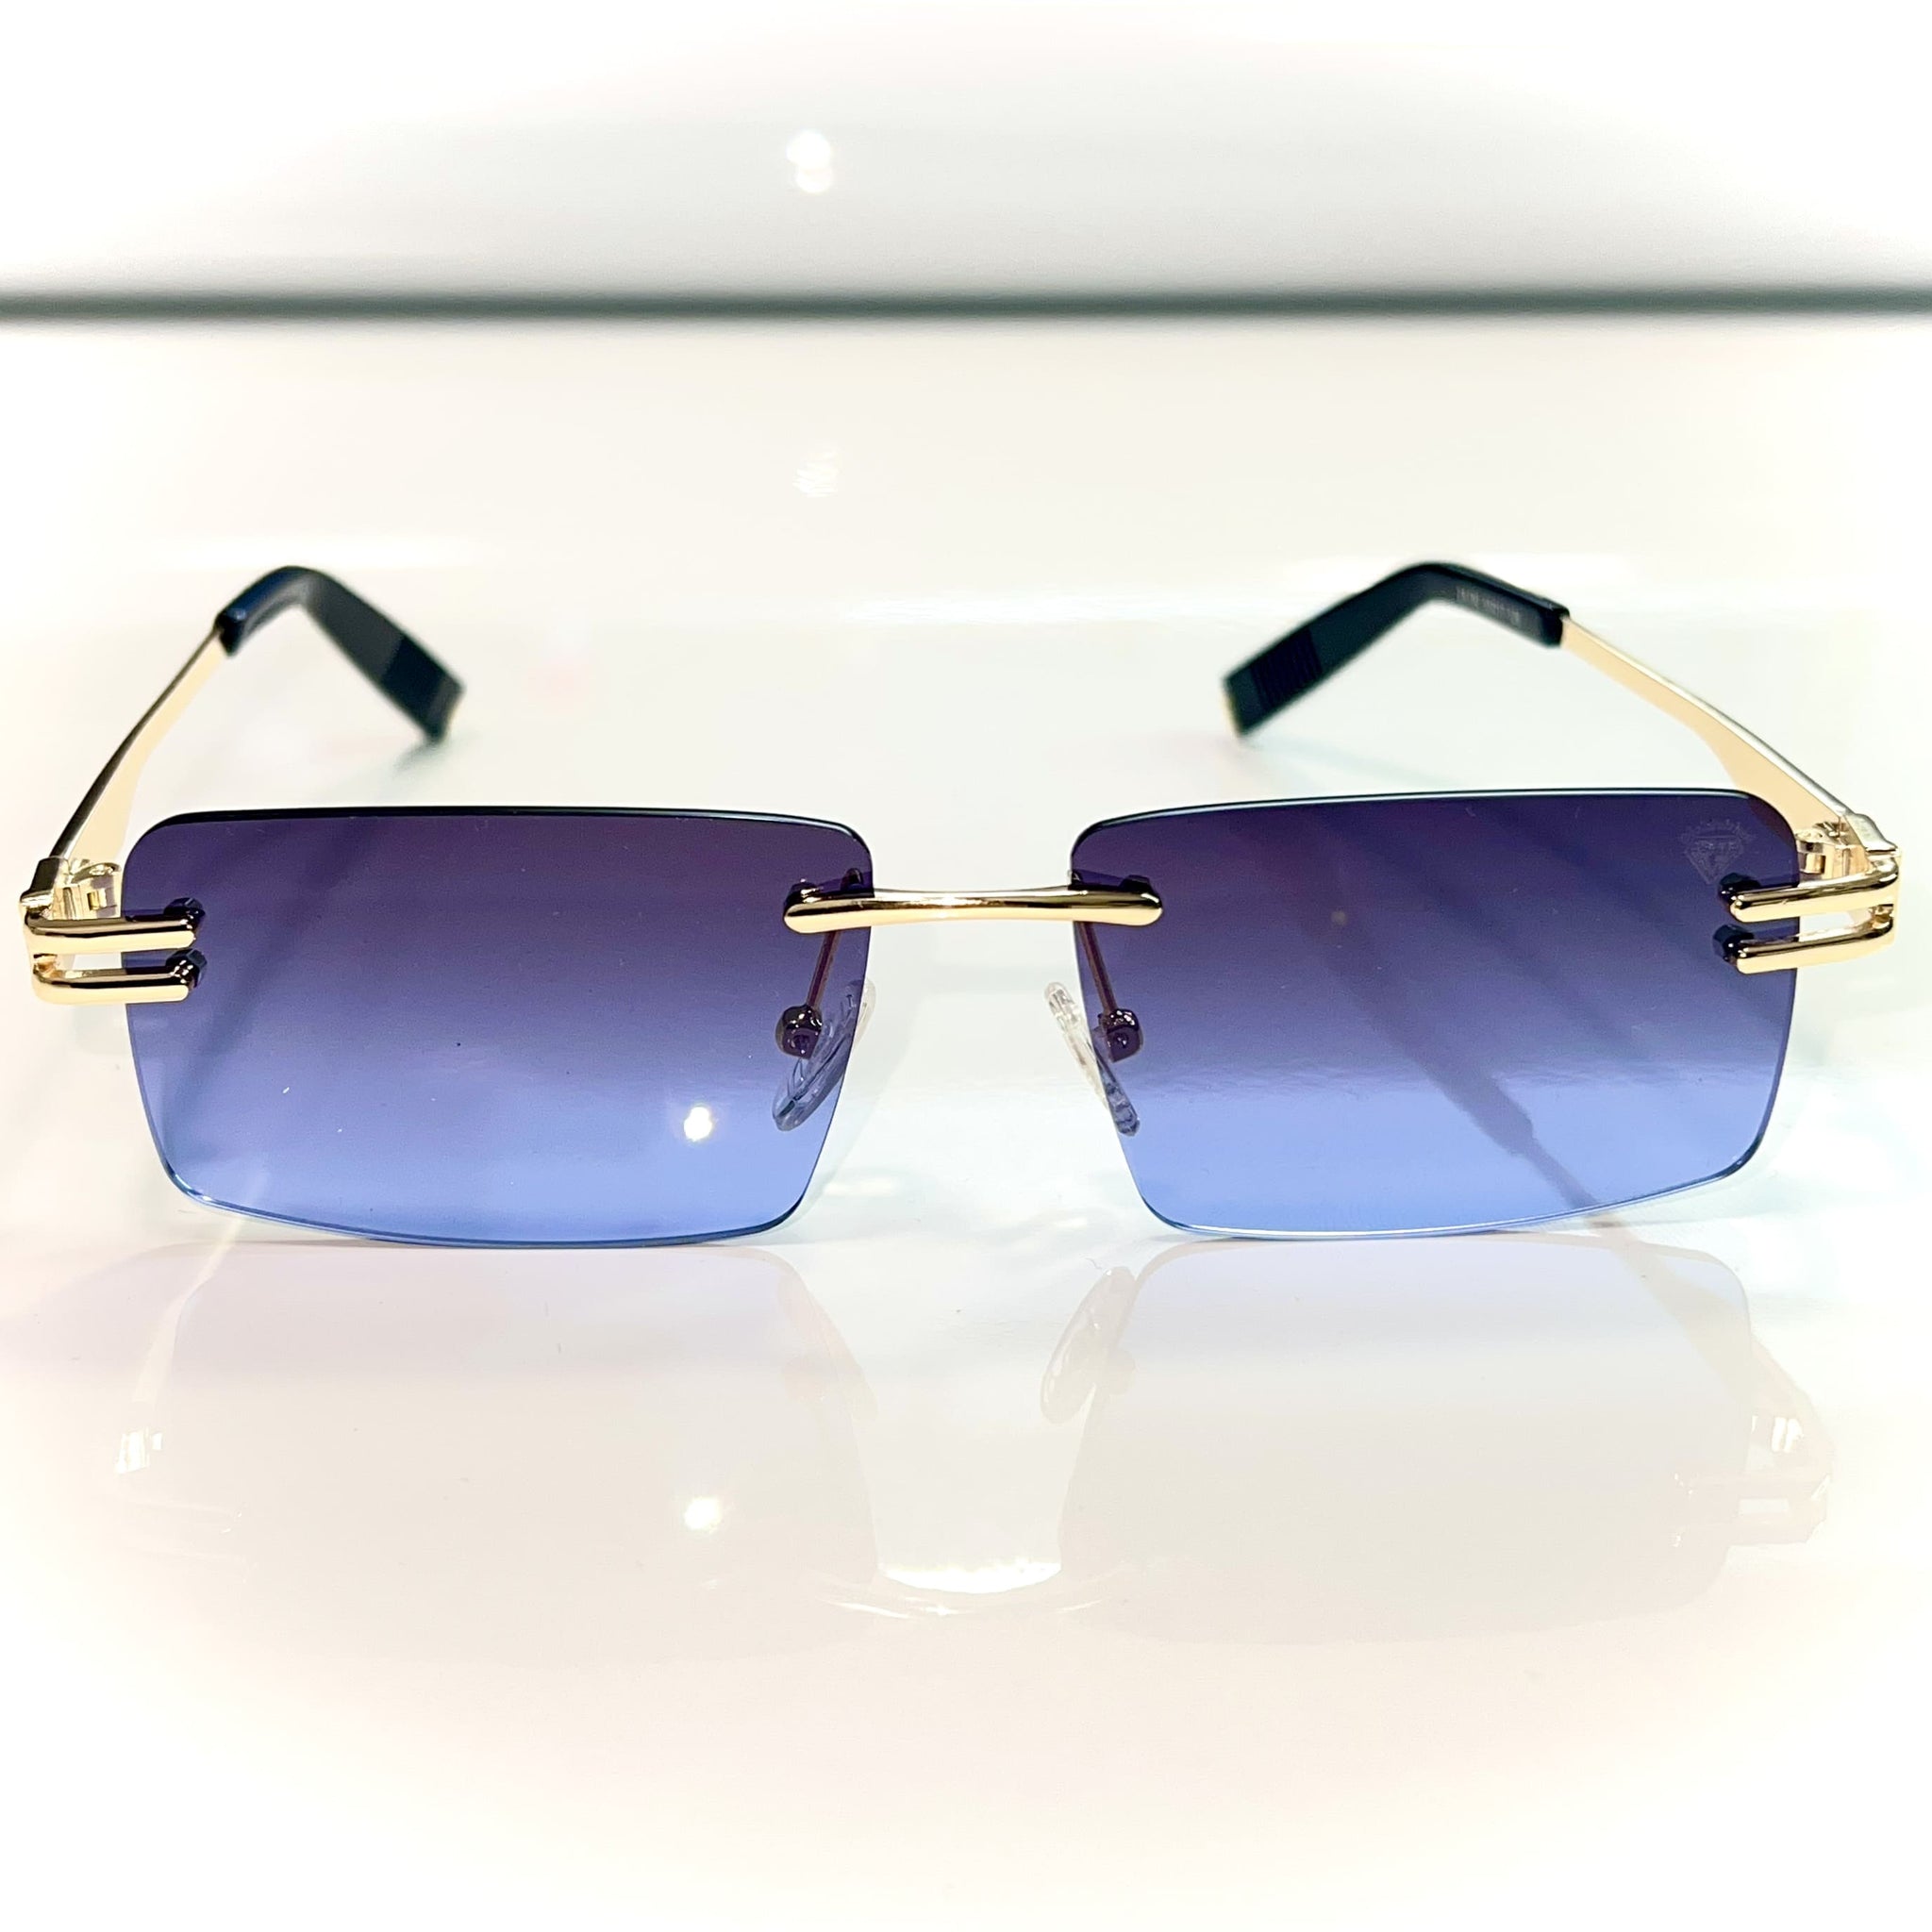 Sehgal Premium glasses - 14k gold plated - Blue Shade - Gold frame